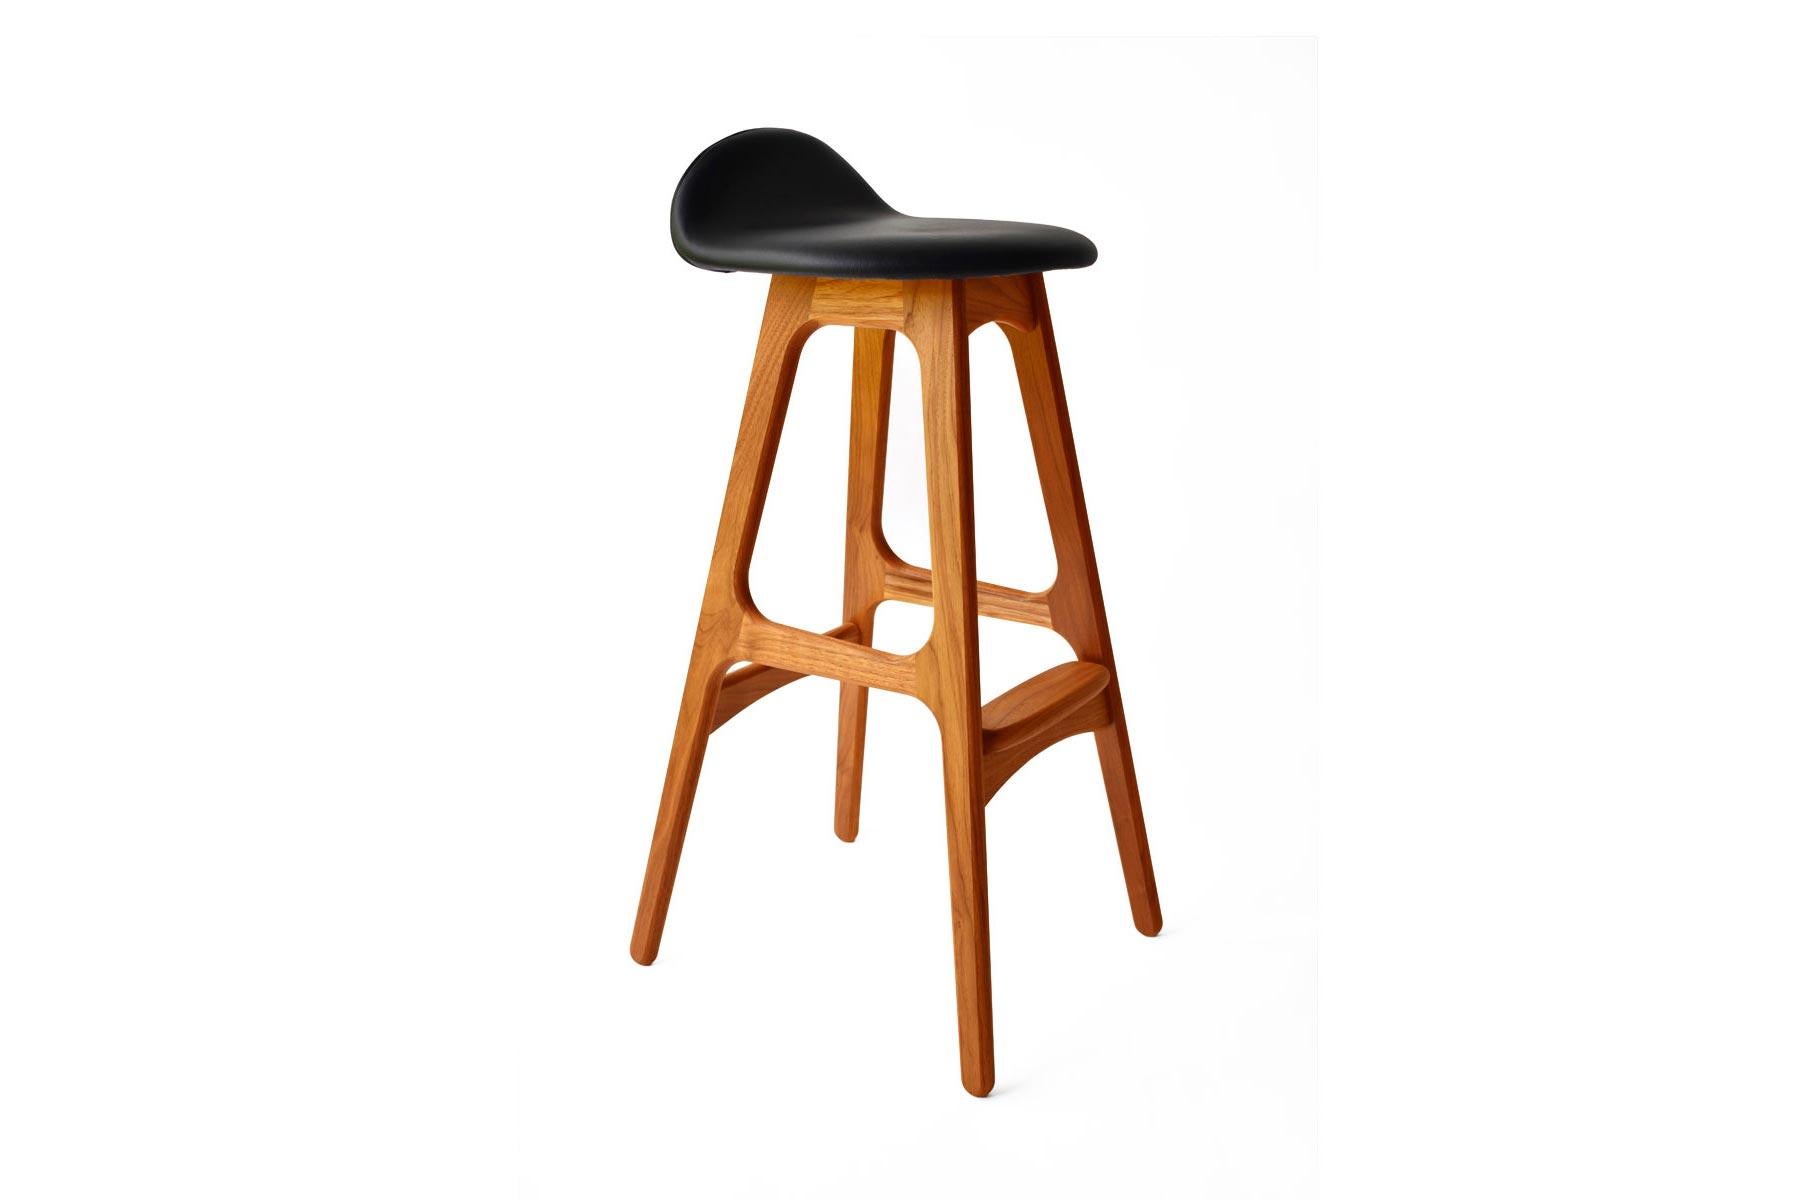 Originally produced in the 1960s, the Model 61 counter stool designed by Erik Buch is a beautiful example of Danish modern design. In production again for the first time, this instant classic is perfectly suited for any modern home or office, and